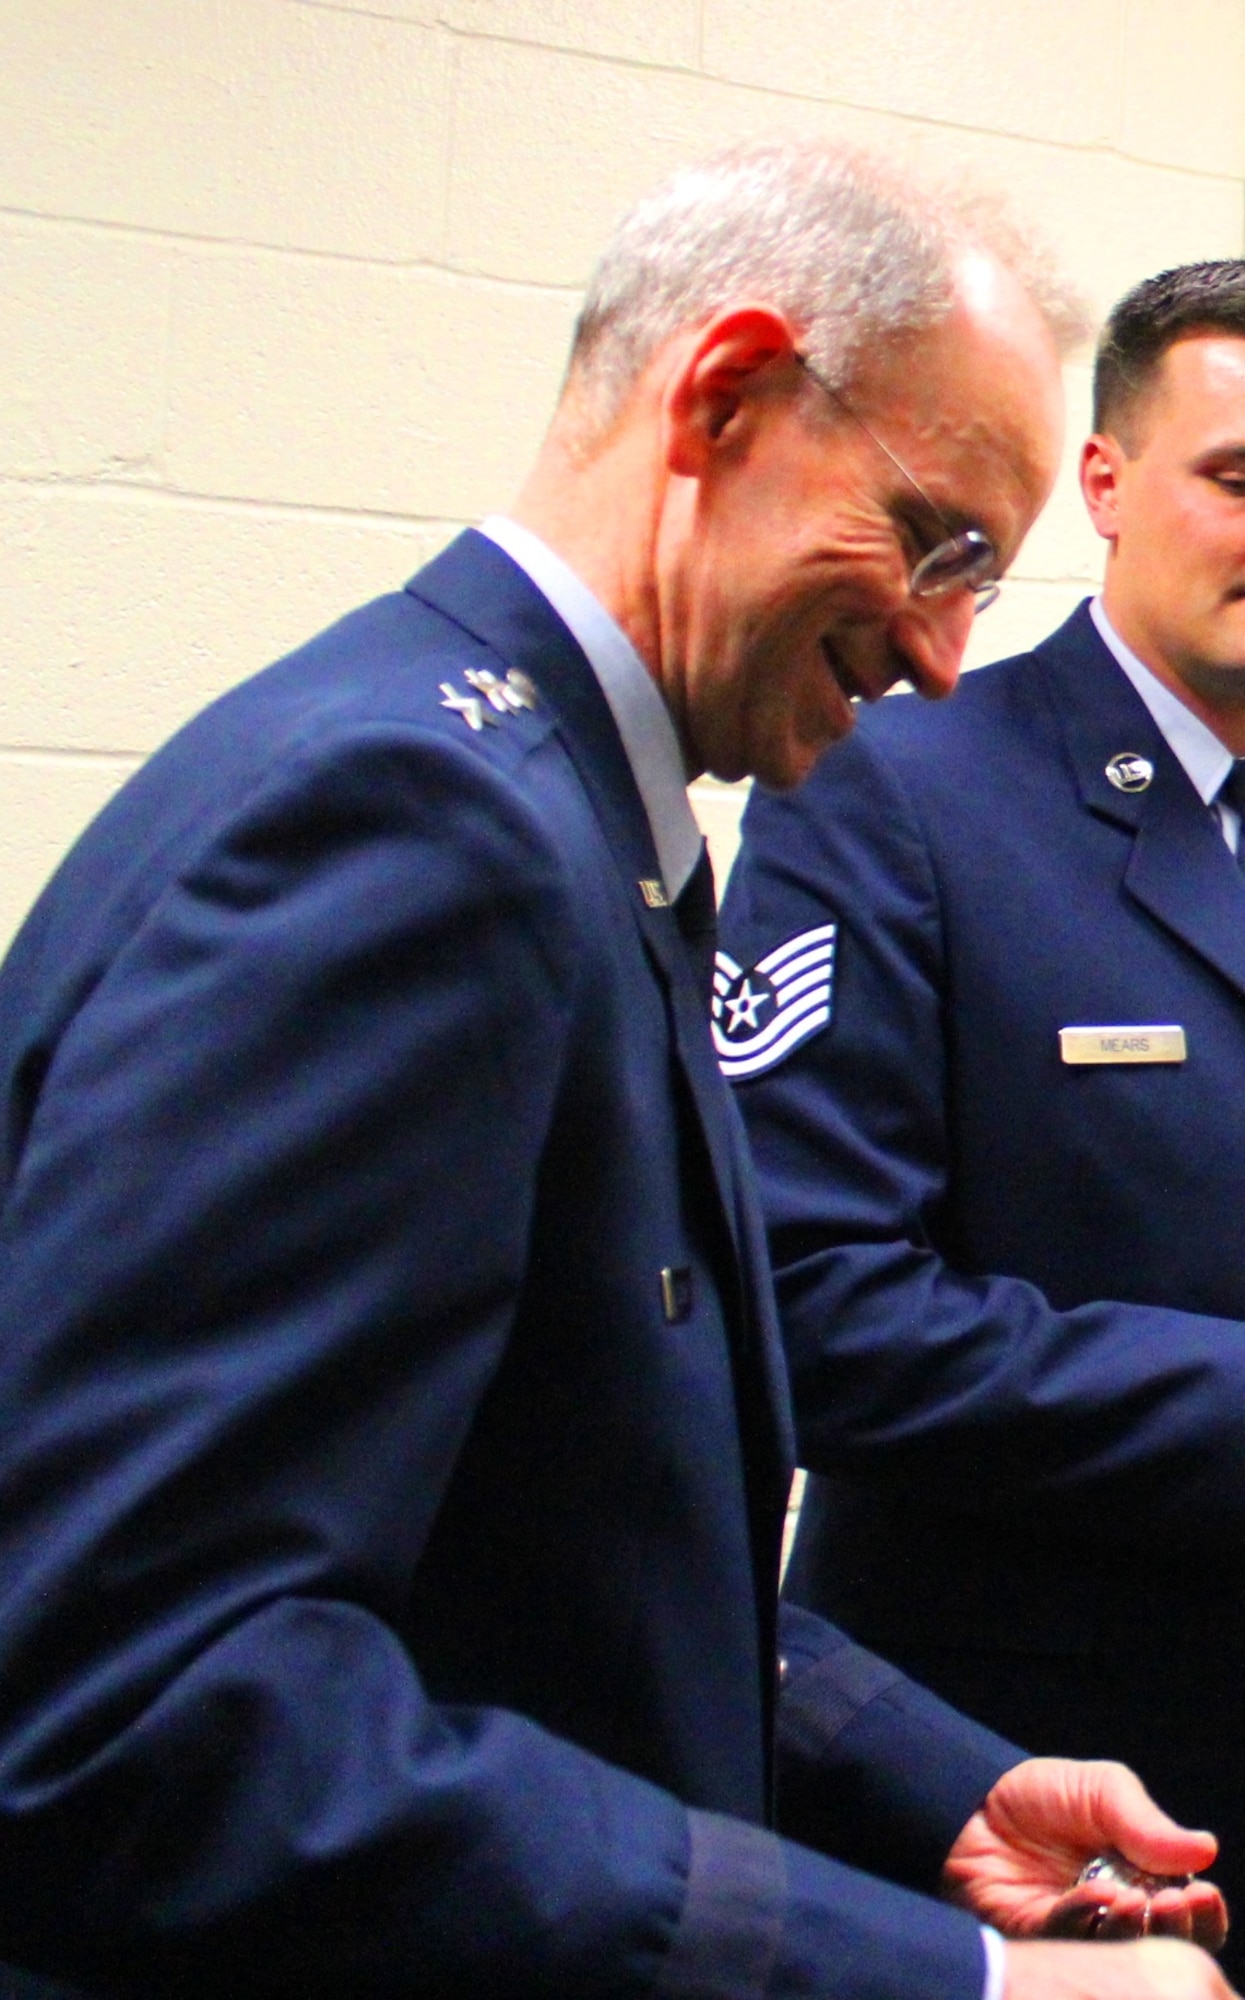 Air Force Surgeon General Lt. Gen. (Dr.) Mark Ediger prepares to present all five Air Force EMDP2 charter class students with the AF Surgeon General’s coin. Students met with Gen. Ediger backstage, prior to the start of the commencement ceremony, held at George Mason University on May 11, 2016. (U.S. Air Force photo by Prerana Korpe, AFMS Public Affairs)